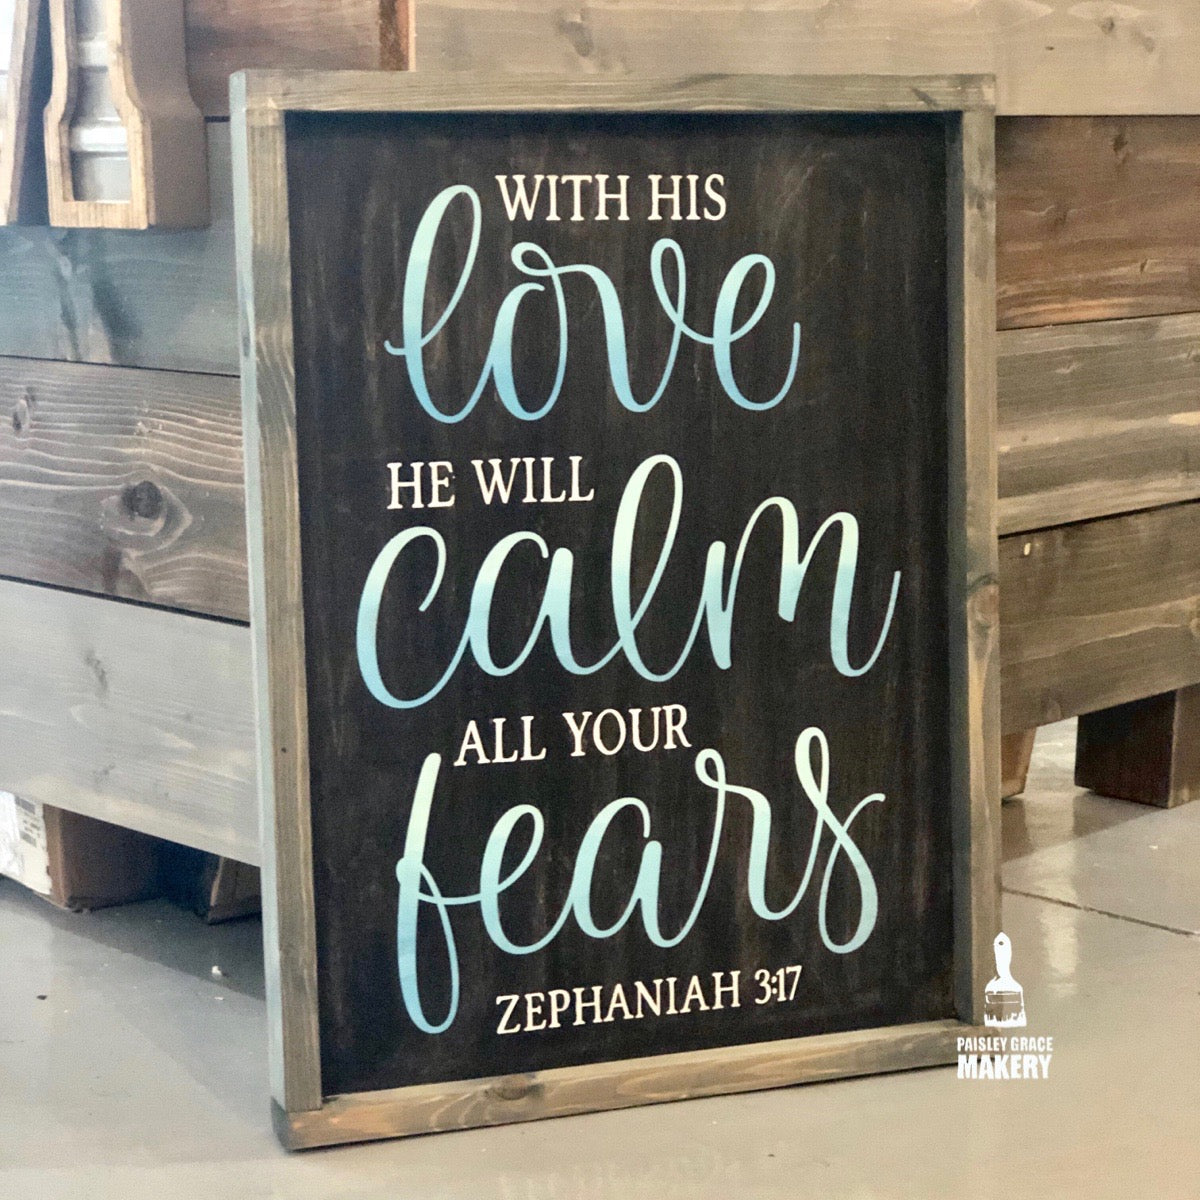 With His Love He will Calm all your fears: Signature Design - Paisley Grace Makery